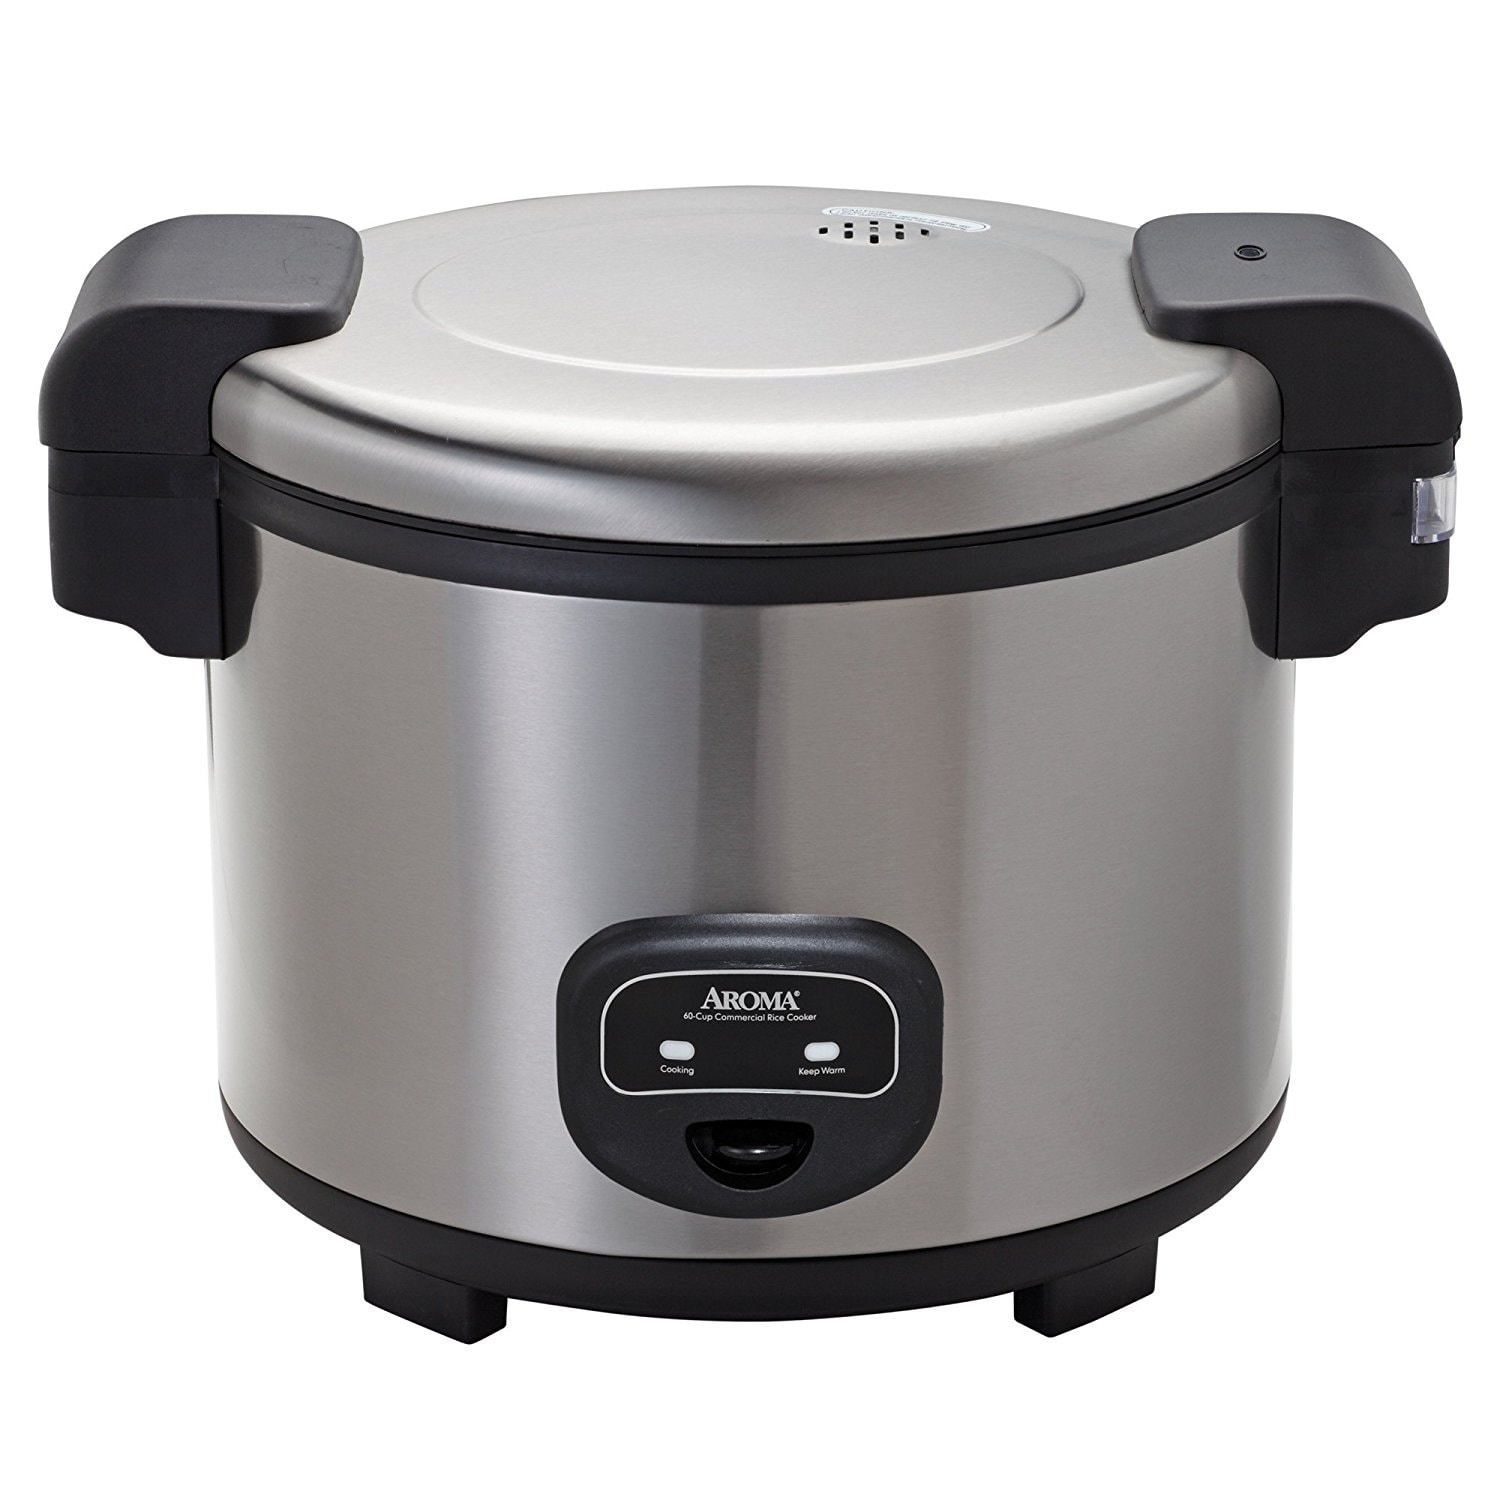 https://ak1.ostkcdn.com/images/products/21487970/Aroma-ARC-1130S-60-Cup-Cooked-Commercial-Rice-Cooker-7839370f-d964-4c29-85d0-7edc51ae2fca.jpg